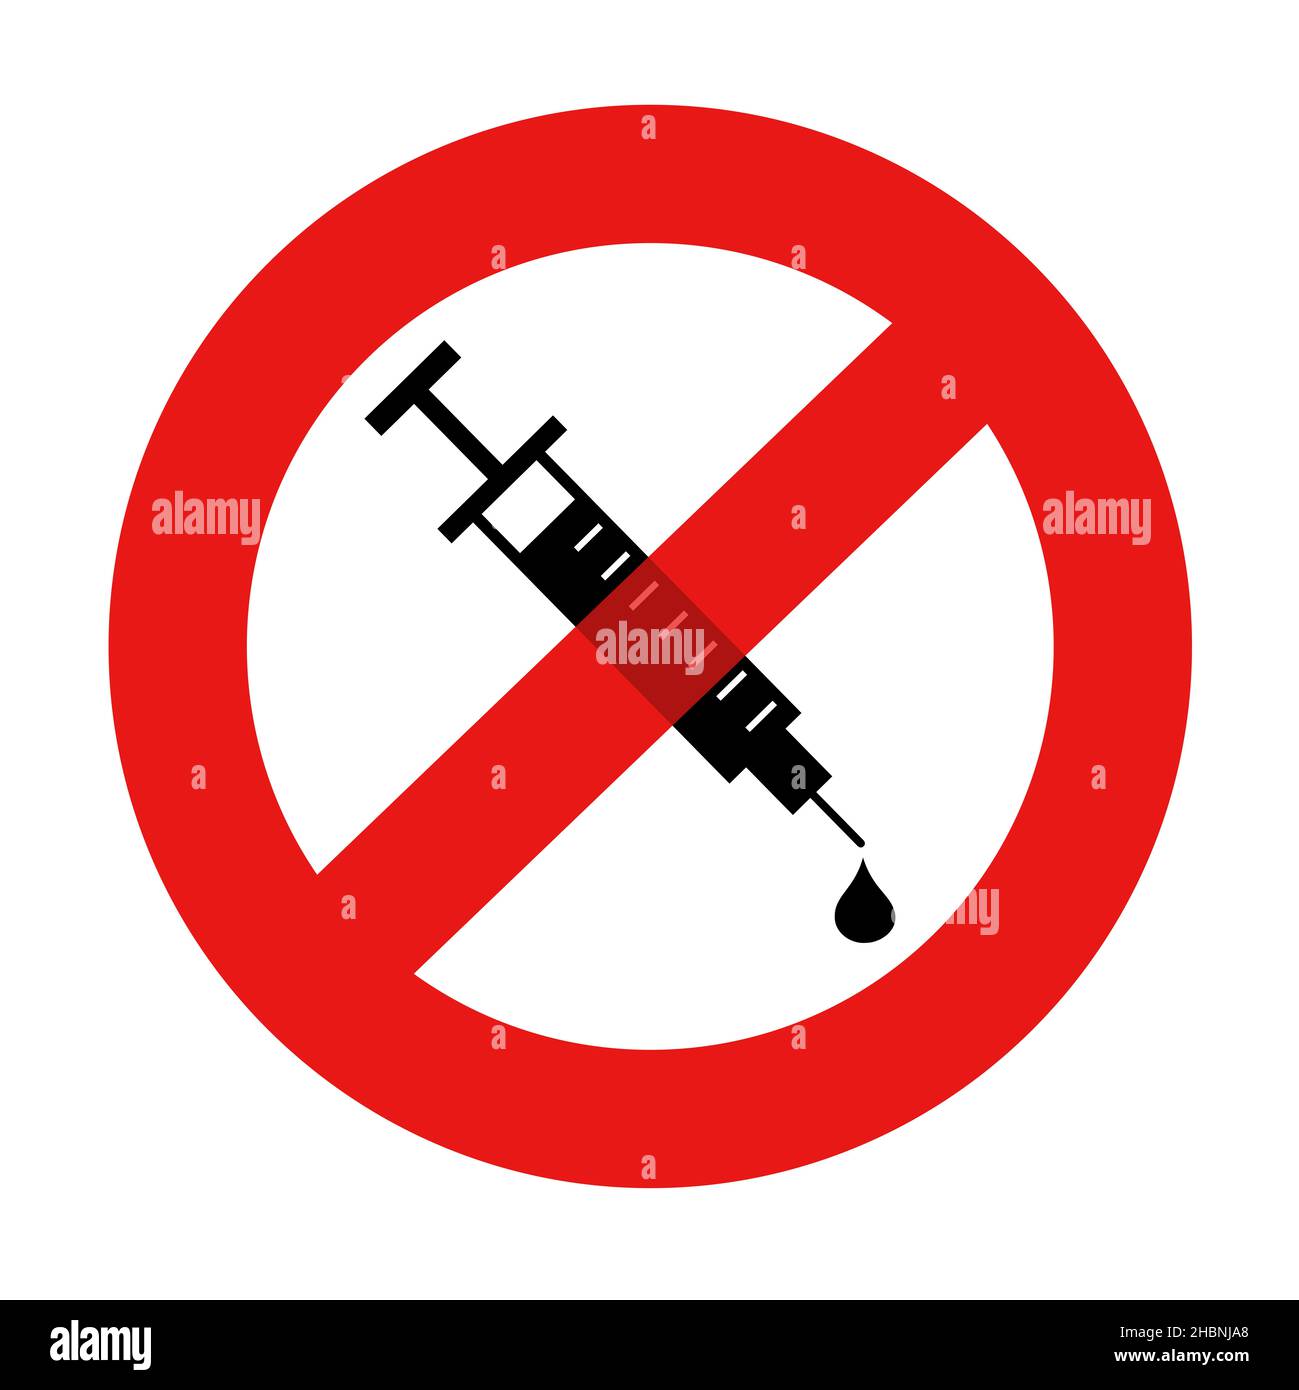 Anti-vax - Syringe with vaccine for vaccination is crossed out. Anti-vaxxer negative rejection and refusal. Vector illustration isolated on white. Stock Photo